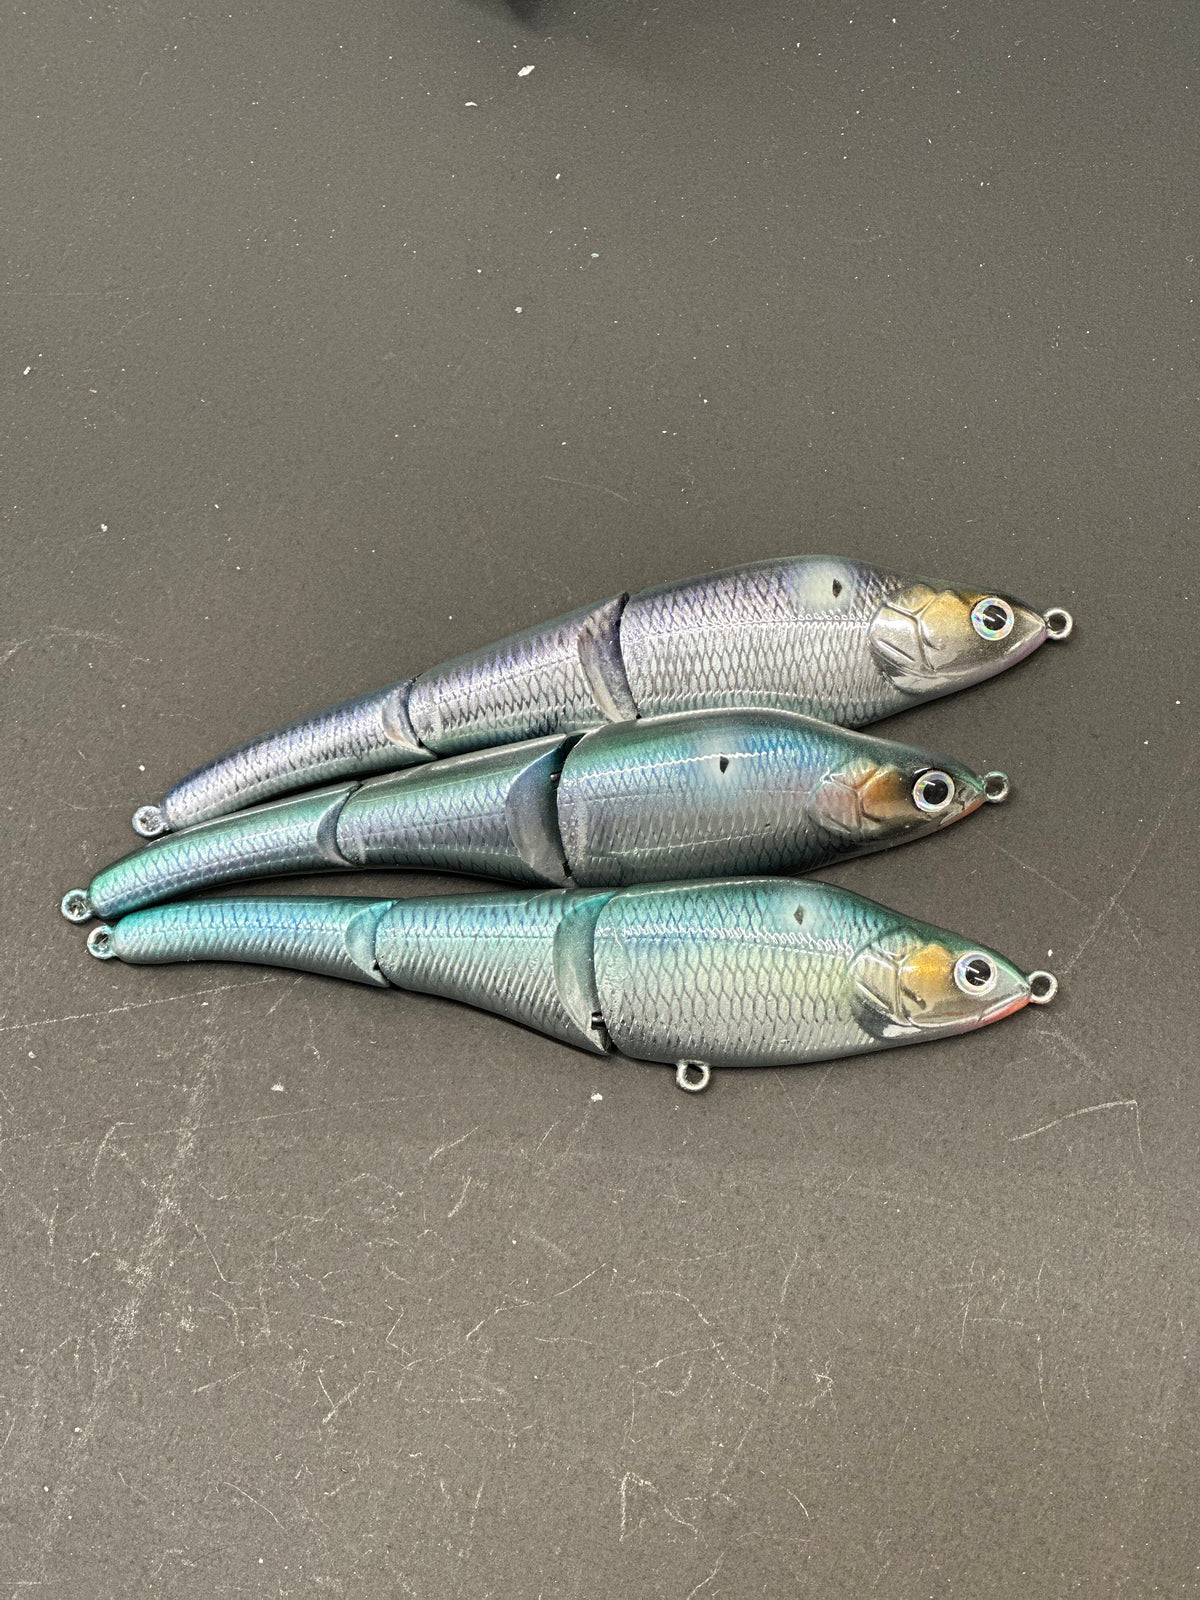 *NEW* BLEMISHED 3 LURES - Magic Swimmer 125 SK - Chrome